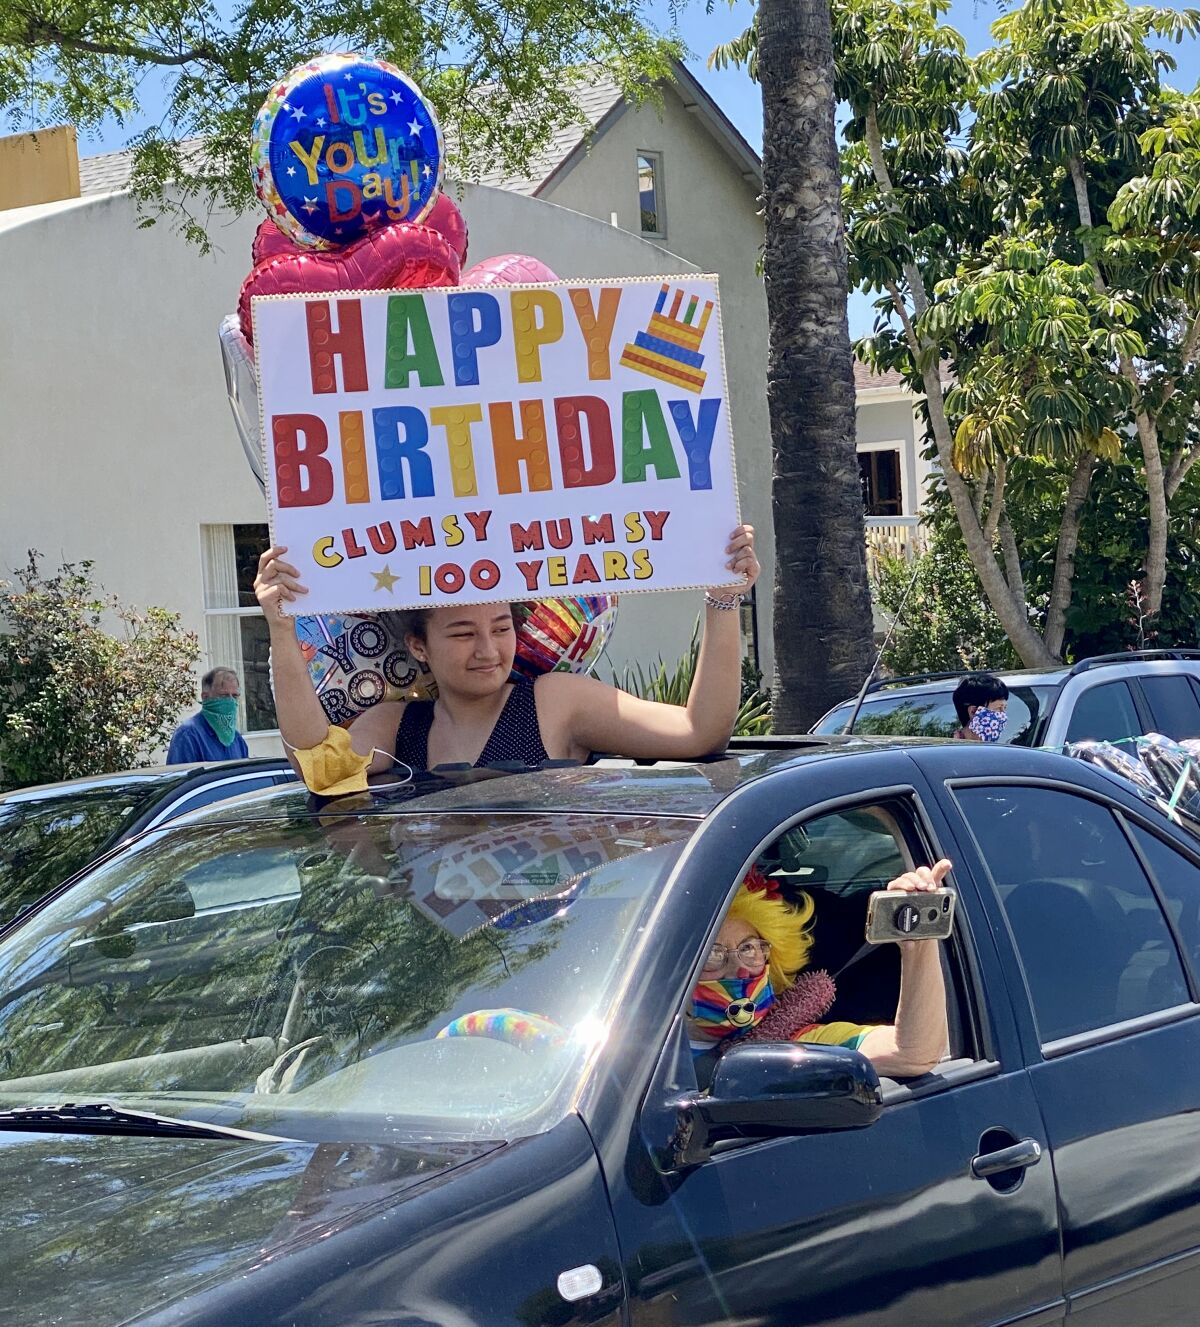 People in about 20 cars participated in Ruby Minder's 100th-birthday parade May 15, some greeting her by her clown name, Clumsy Mumsy.